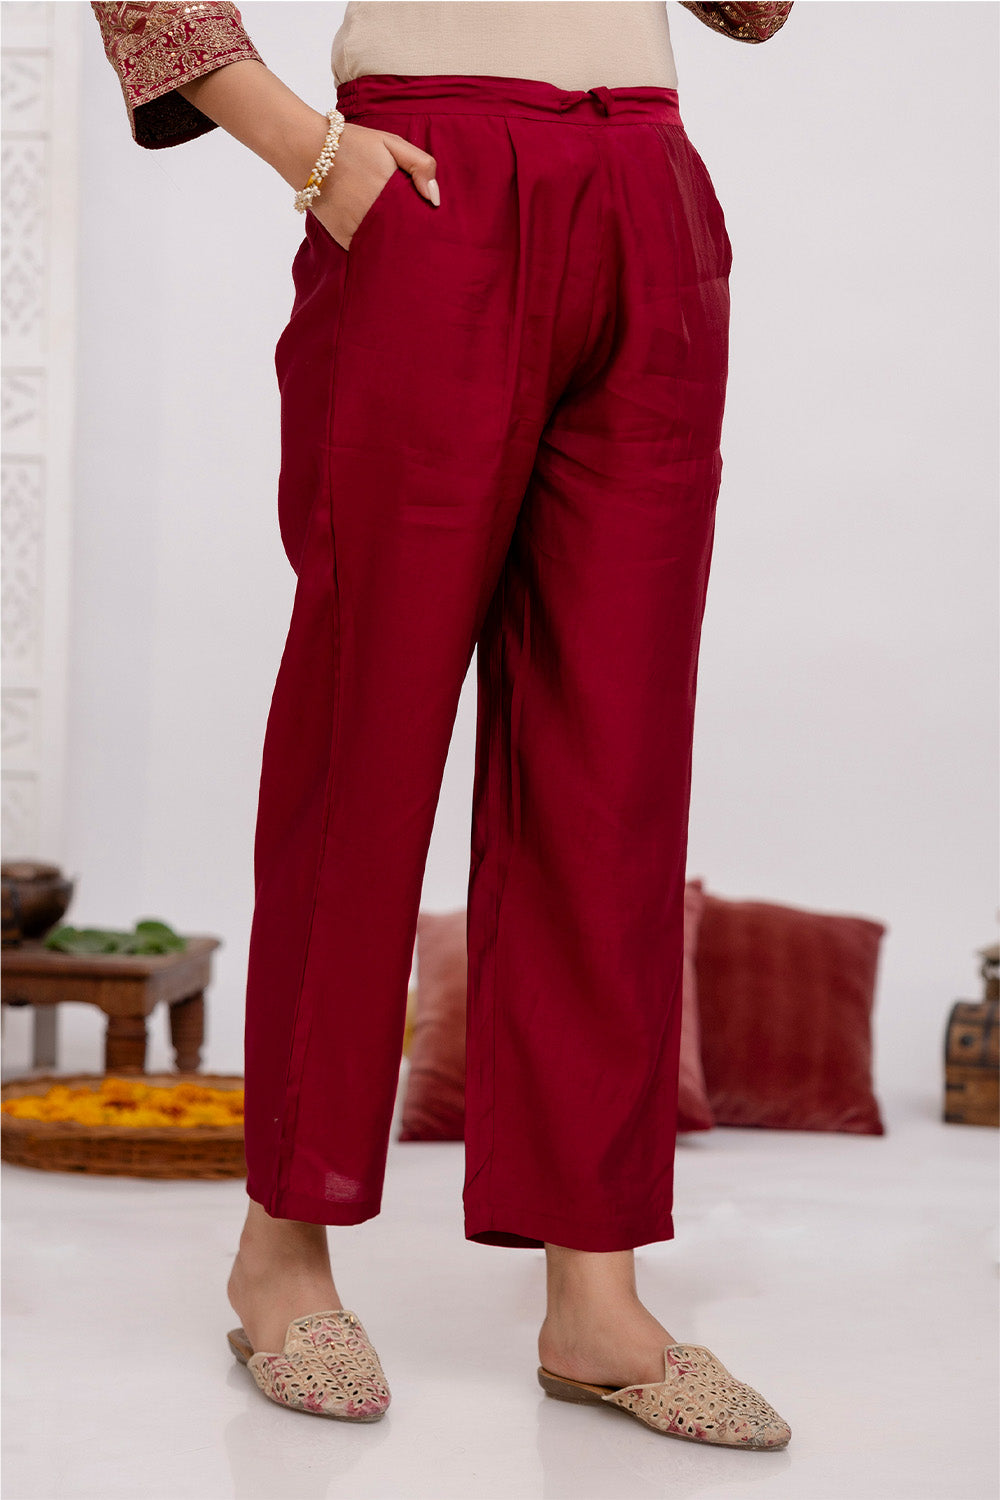 Maroon Color Muslin  Neck Embroidered Suit